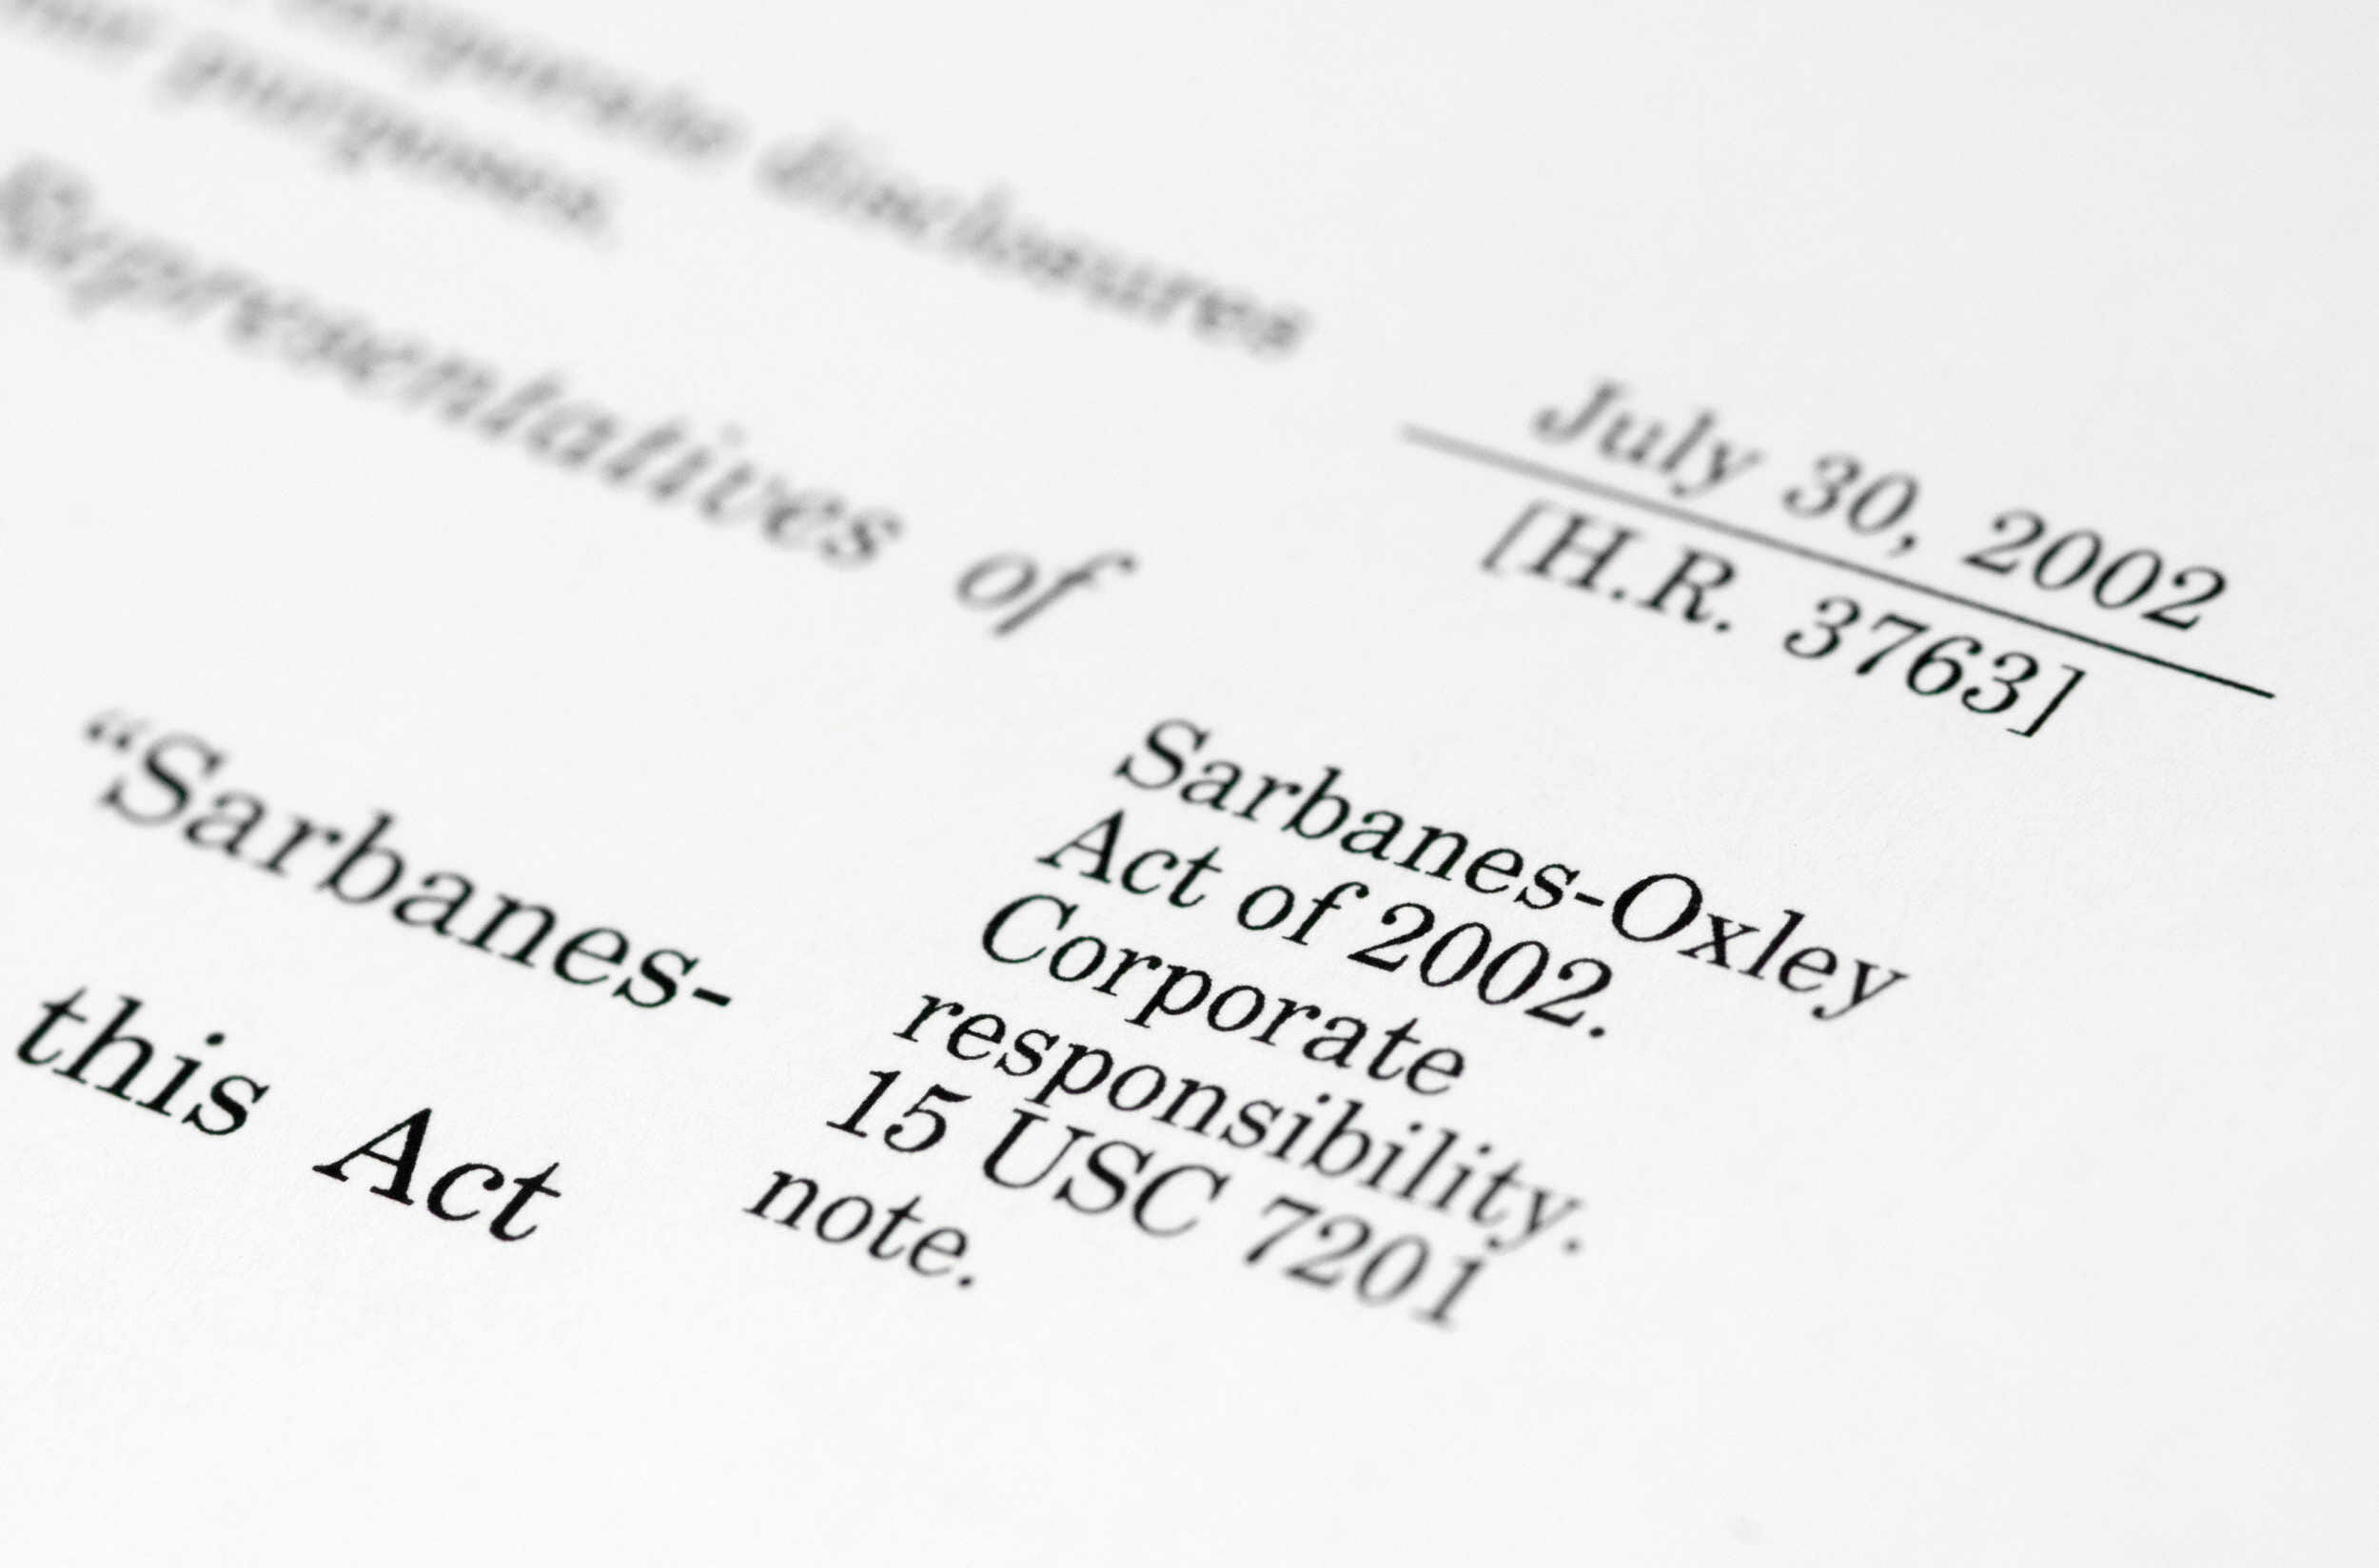 A Brief Note On The Sarbanes Oxley